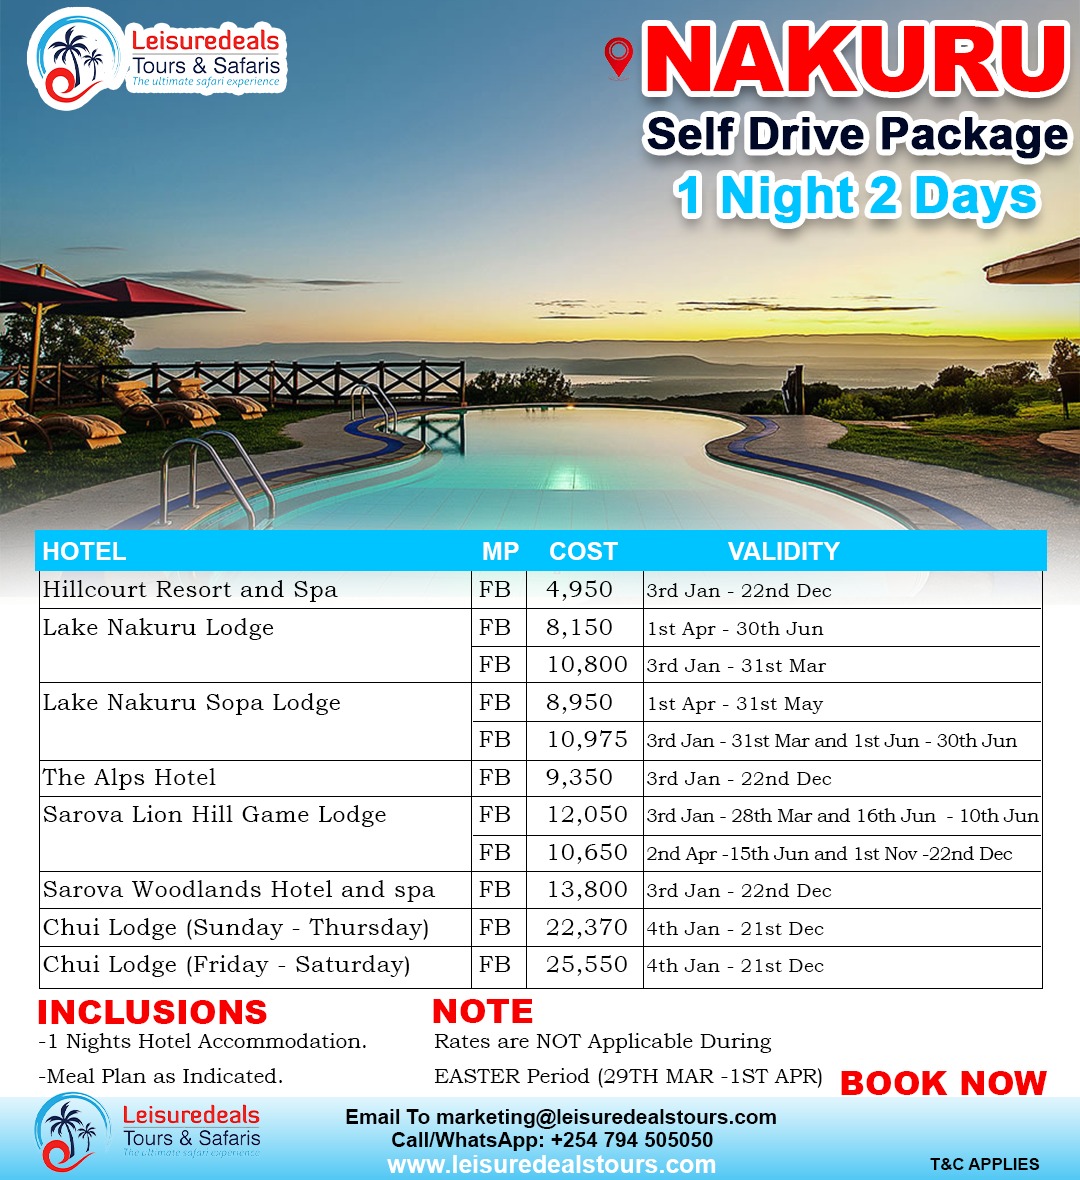 Take a short, quick and fund trip with your family at Lake Nakuru this weekend! Enjoy the peace and comfort on a wide range of hotels at exciting rates.

#Leisuredealstours #lipapolepole #2024rates #bushholidaypackages #safarivacation
#nakuruholiday #HolidayIdeas #lakenakuru